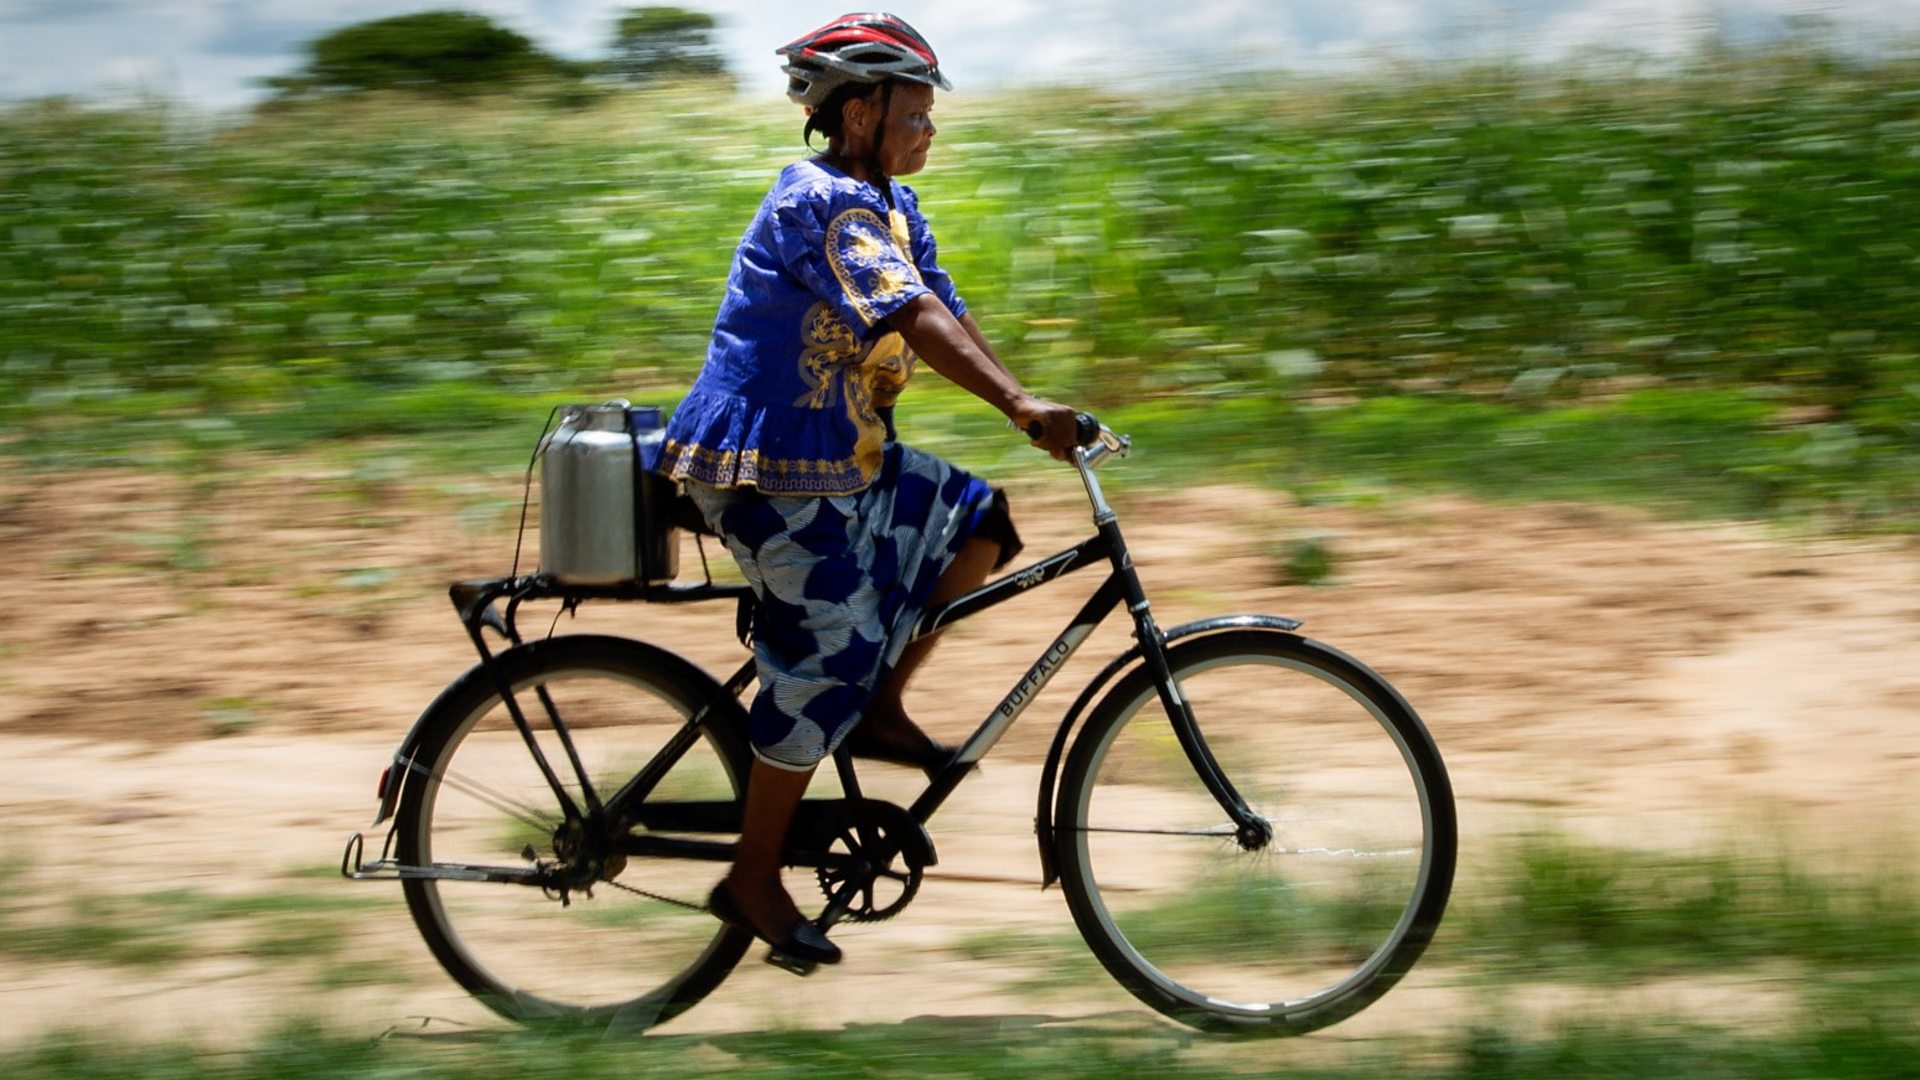 How a bicycle tripled one woman's income - BBC News